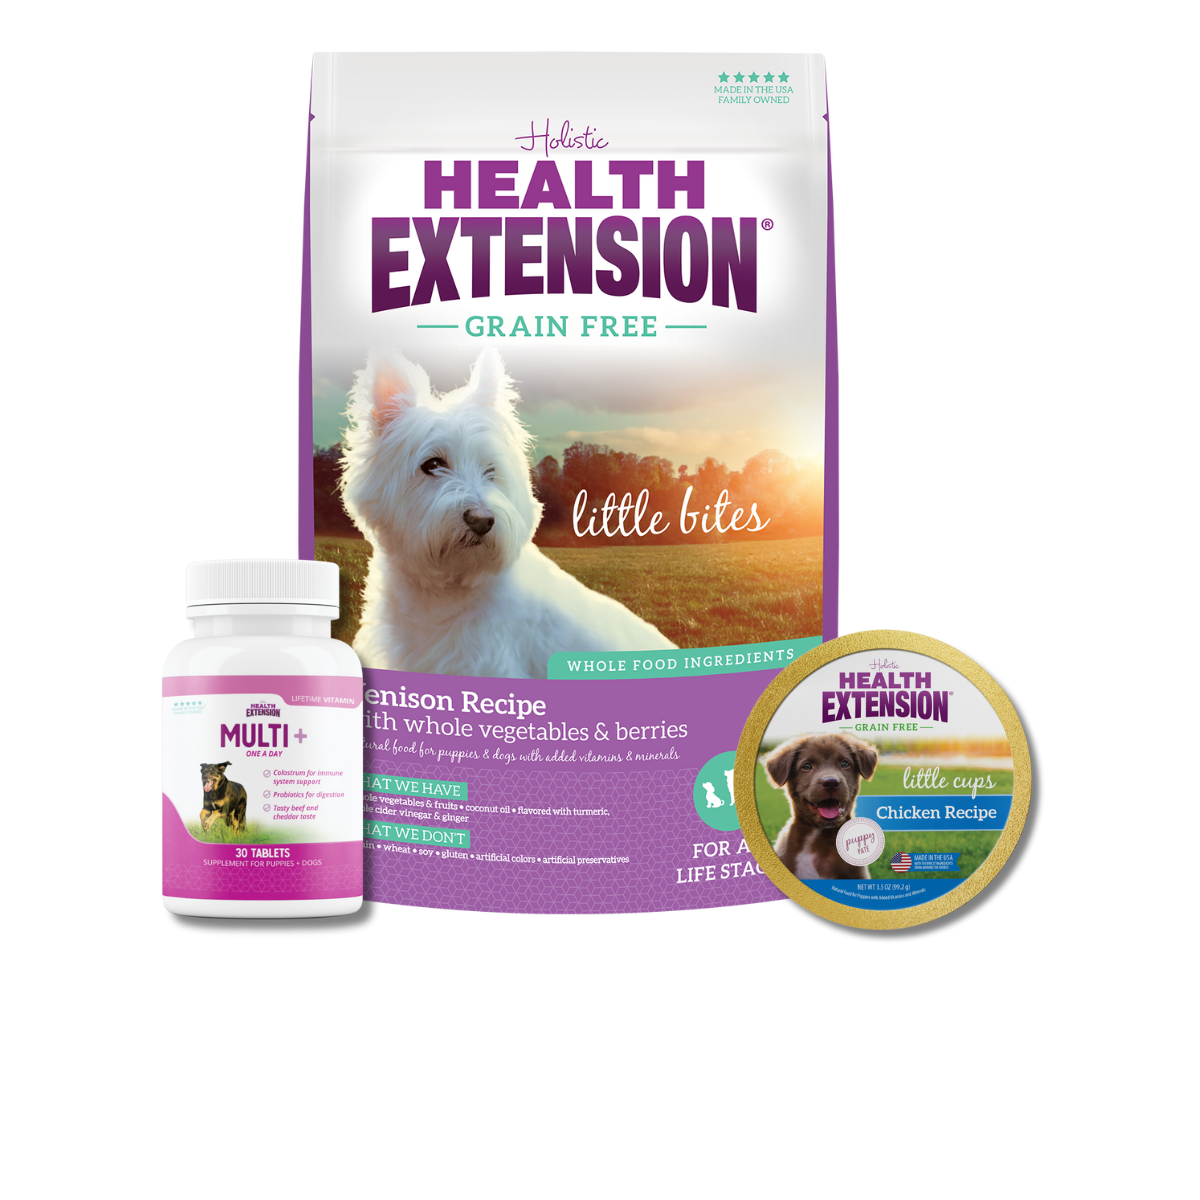 Puppy Trial Bundle for Small Breed: Bag of Health Extension Grain Free Venison Little Bites,  a bottle of Health Extension Multi+ vitamins for puppies and dogs, Grain Free Little Cups for Small Breeds